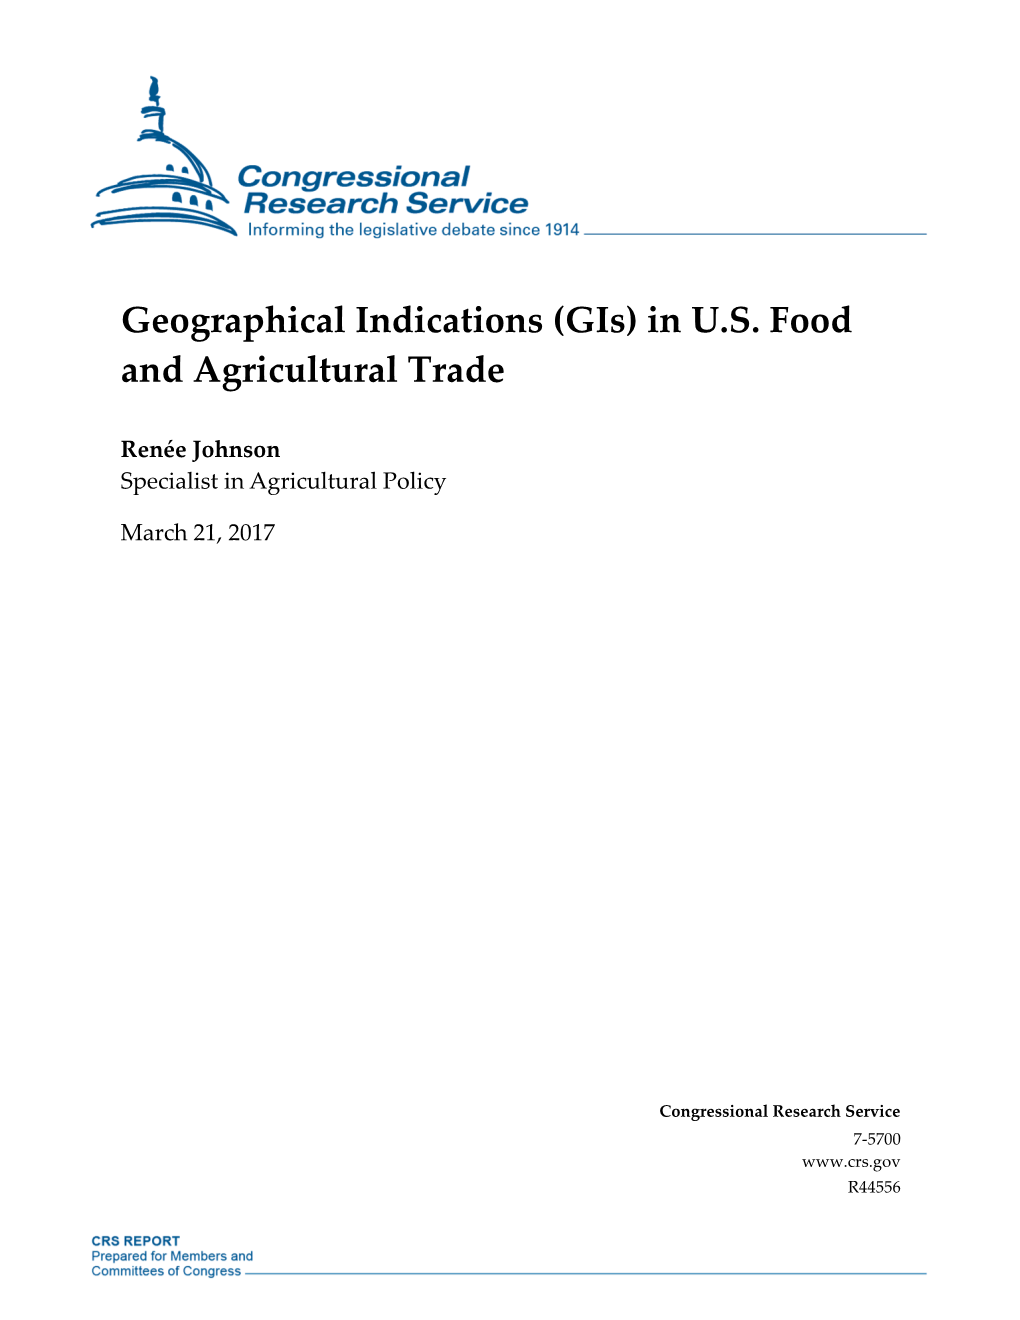 Geographical Indications (Gis) in U.S. Food and Agricultural Trade